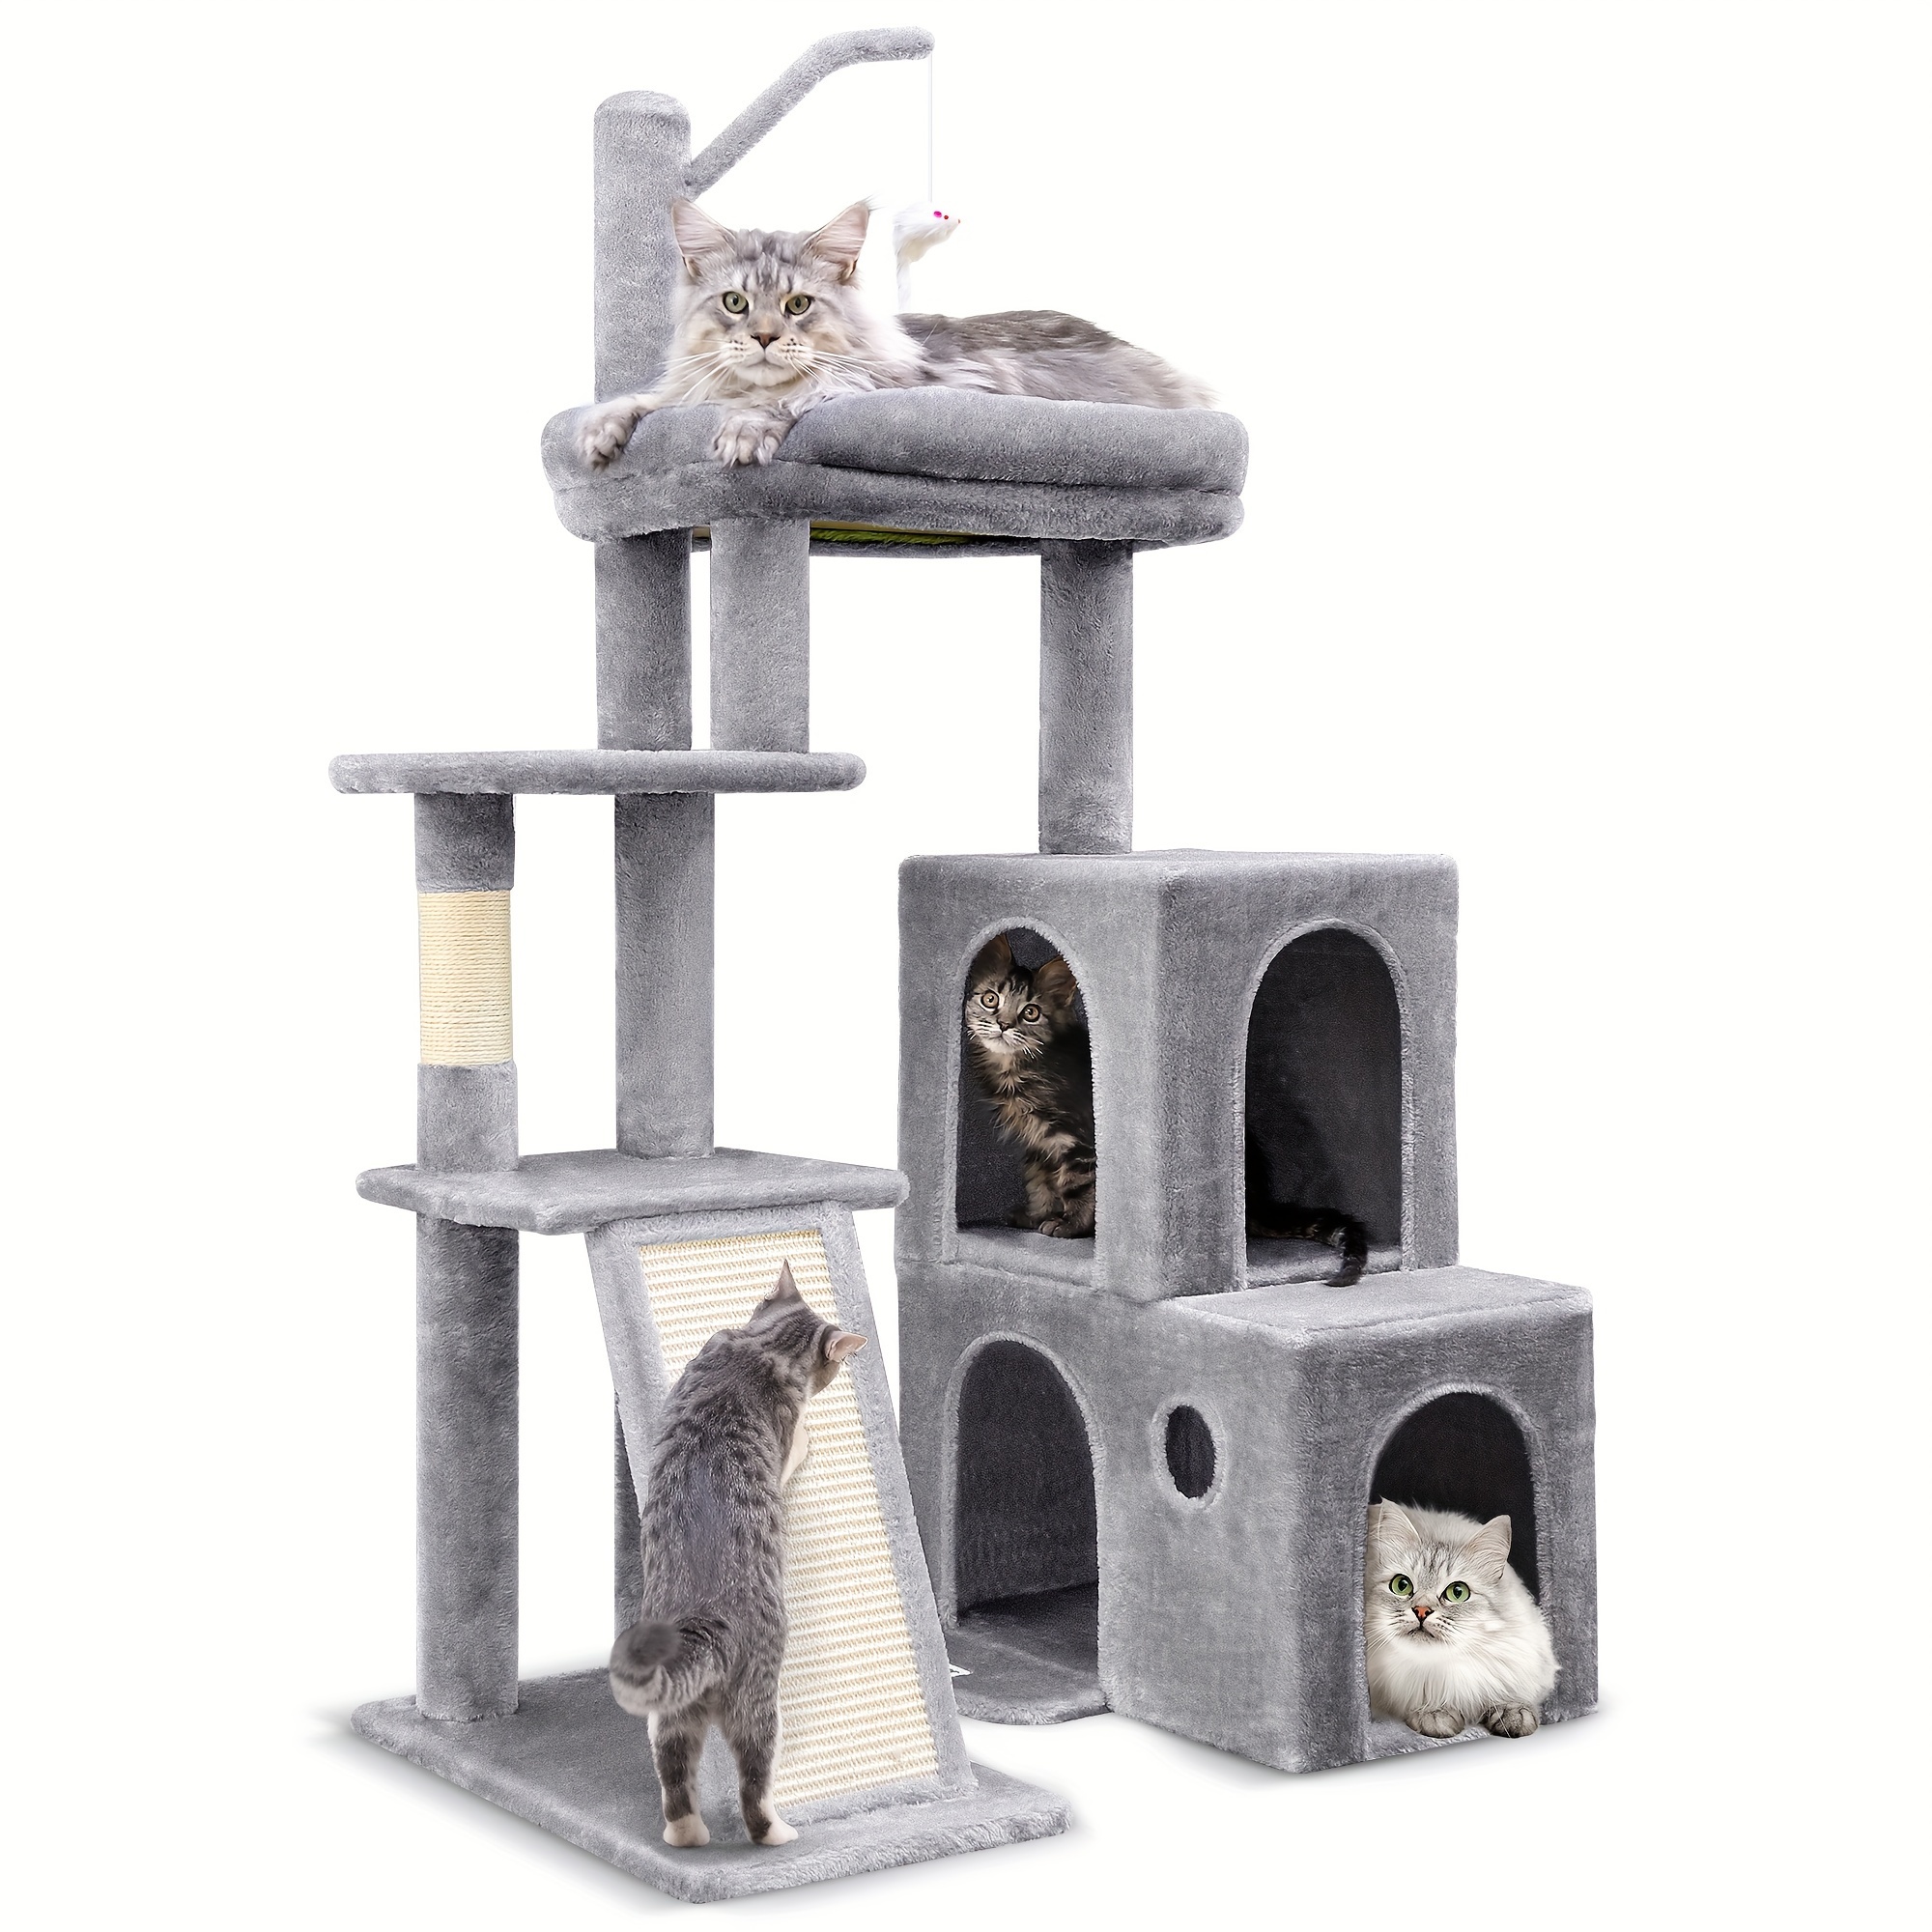 

F50 Cat Tree Tower For Large Indoor Cats, 50-inch Heavy Duty Cat Tree For Big Cats, Maine Coon Cat Tree With Extra-large Padded Platform, Sisal Scratching Board, 2 Large Condos